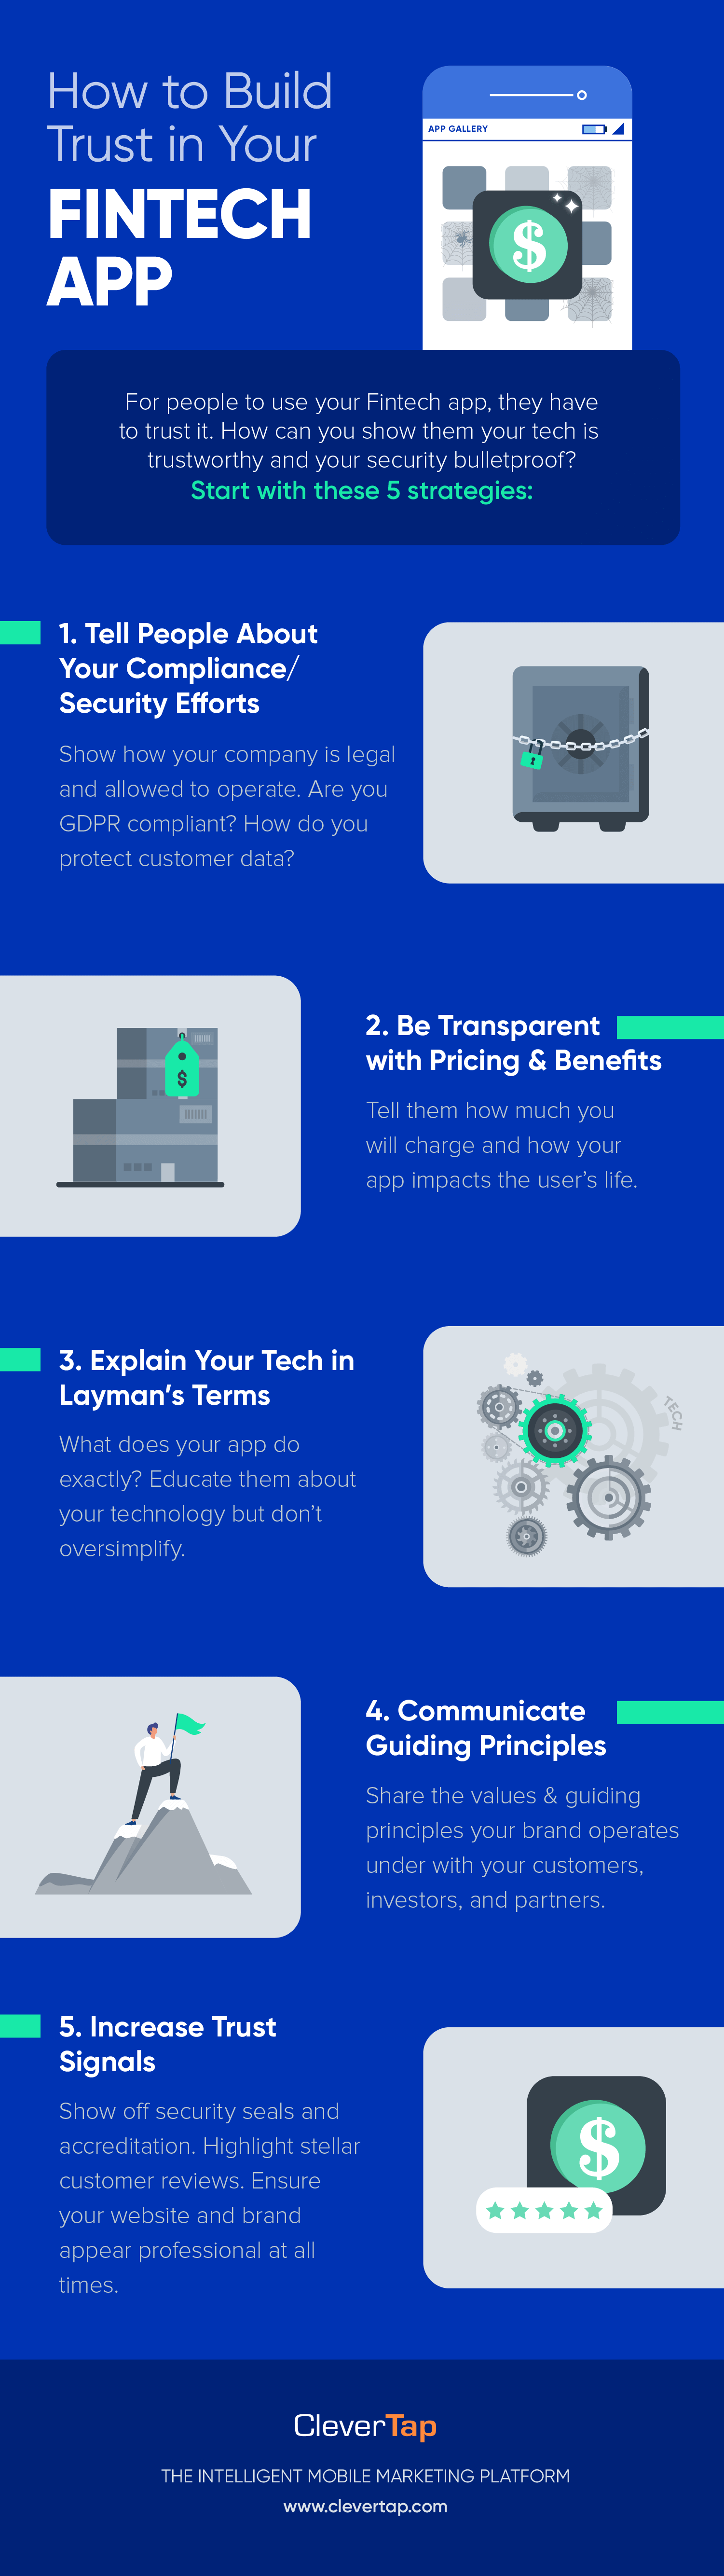 How to Build Trust in Your Fintech App: infographic